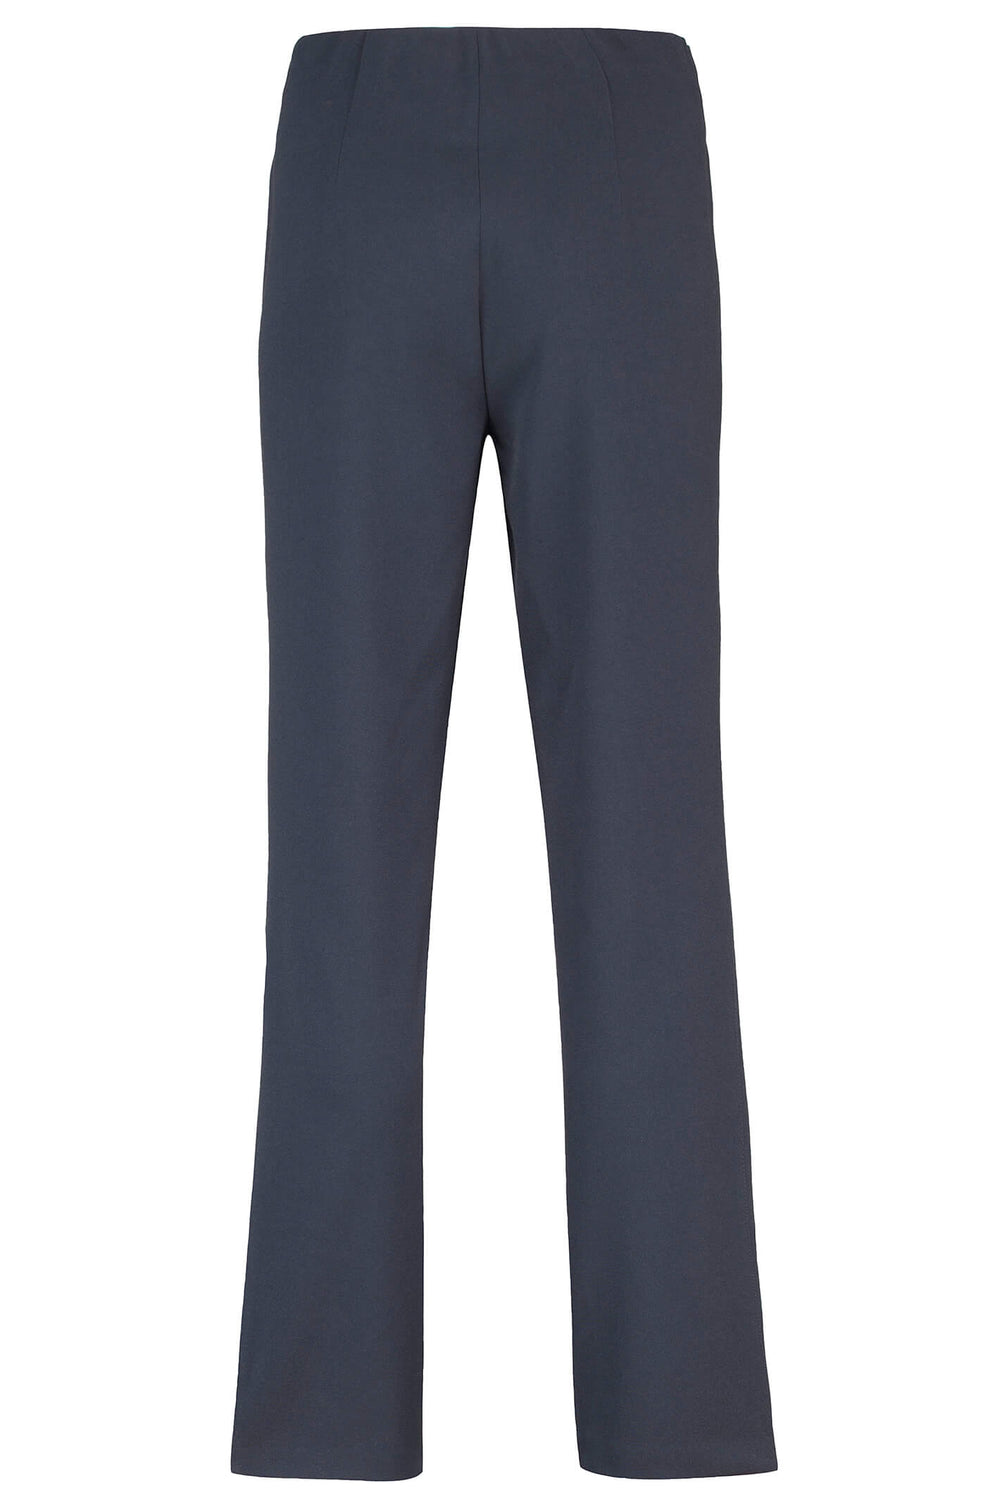 Robell Jacklyn 51408-5689-69 78cm Navy Pull-On Trousers - Shirley Allum Boutique